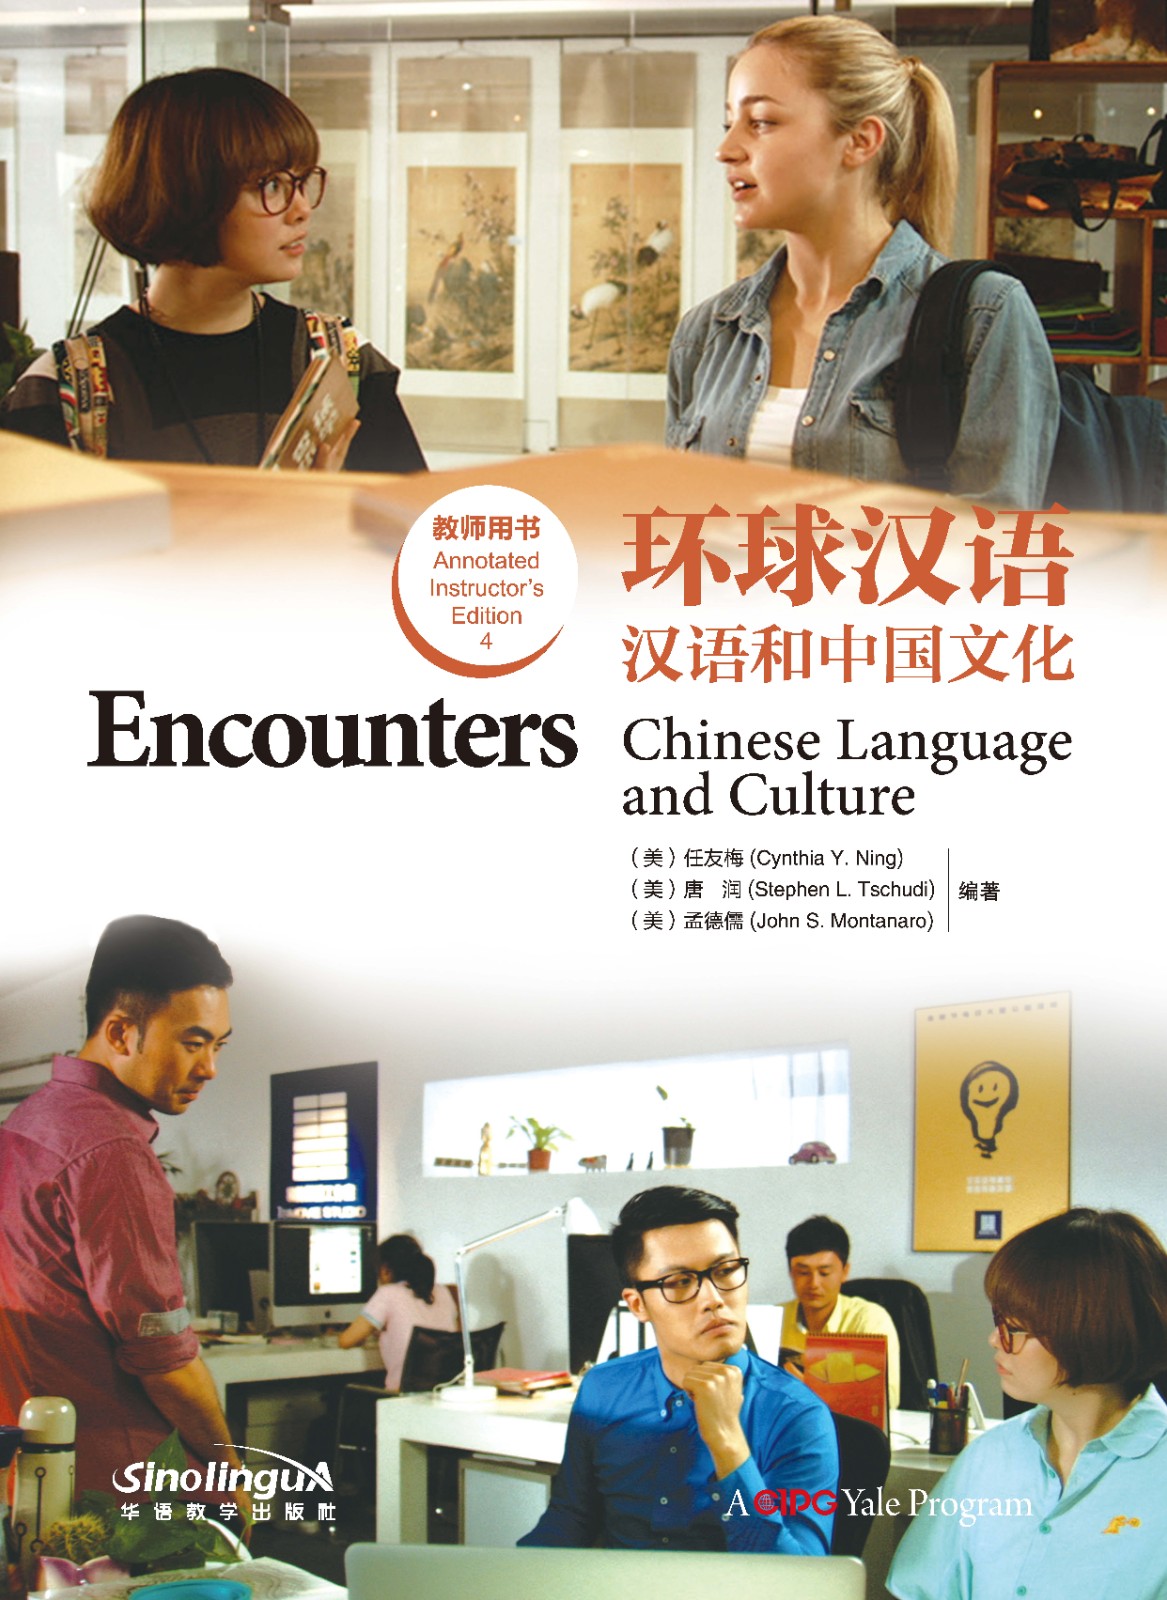 Encounters-Annotated Instructor's Edition 4